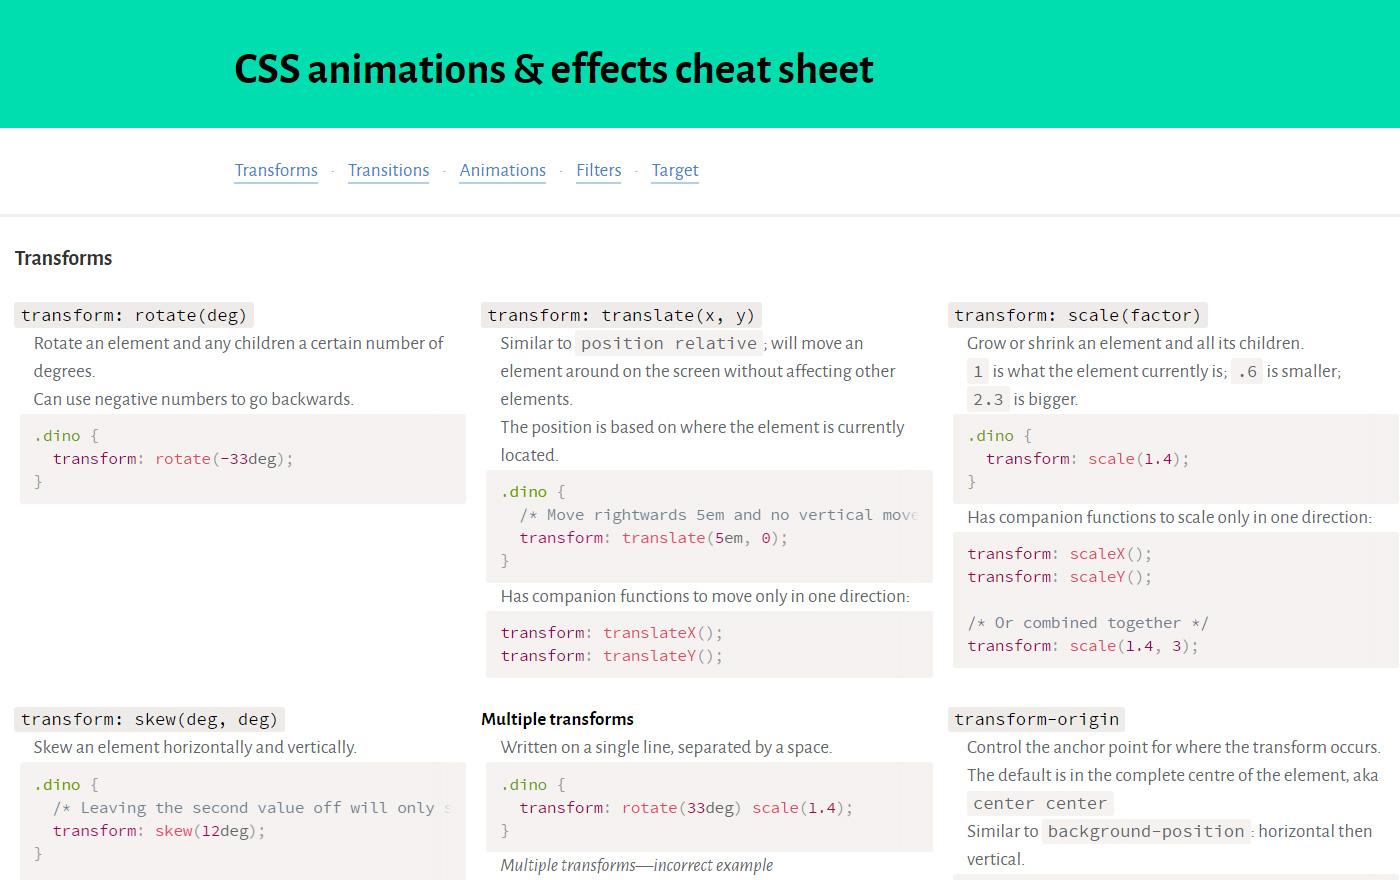 CSS Animations & Effects Cheat Sheet